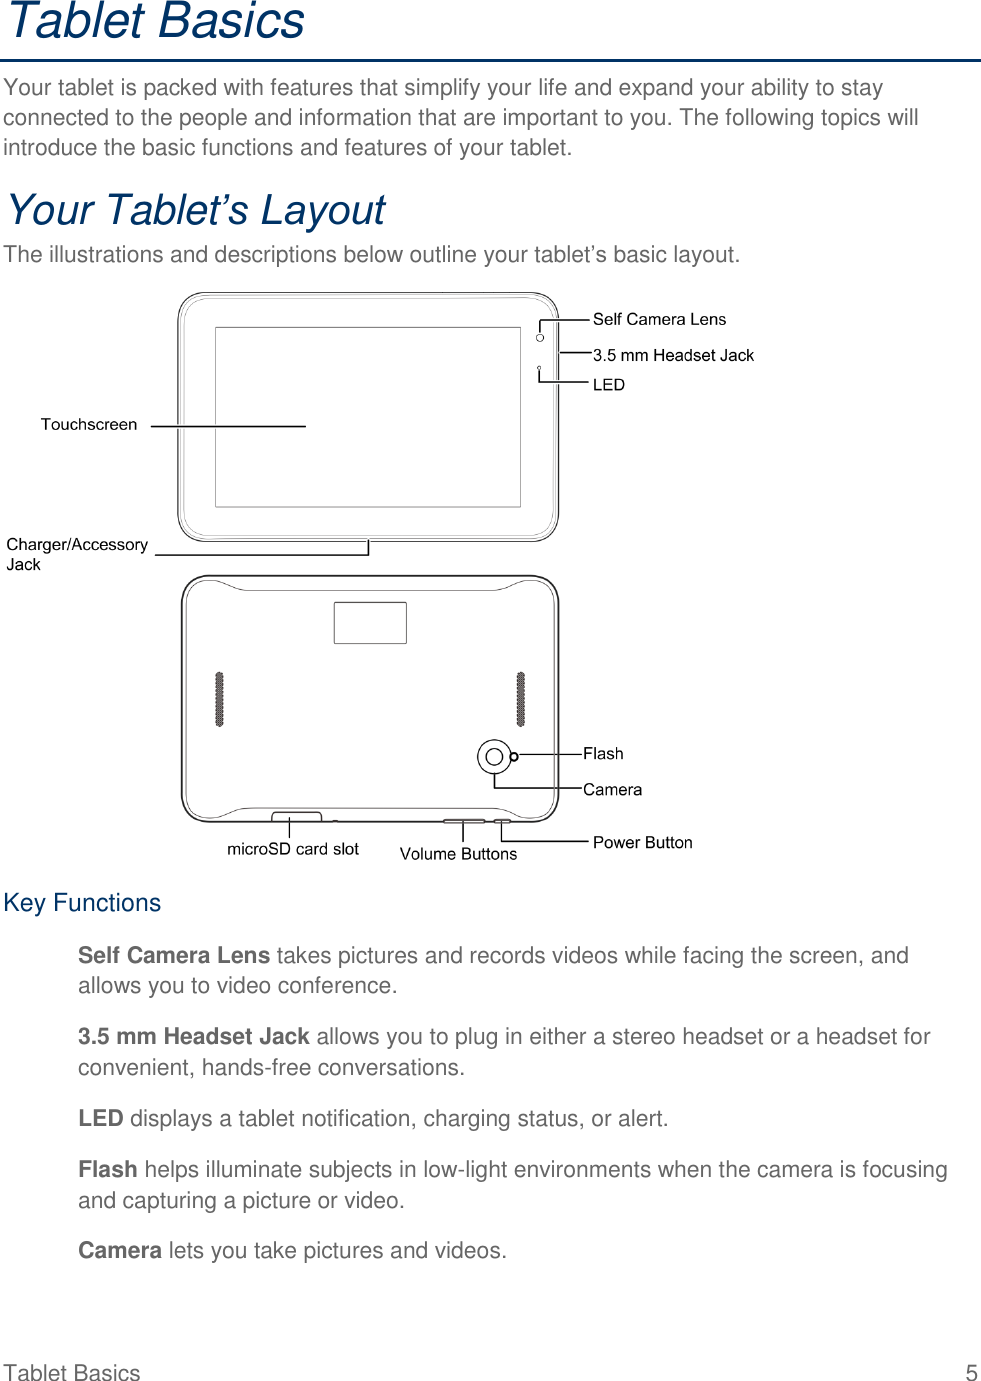  Tablet Basics  5 Tablet Basics Your tablet is packed with features that simplify your life and expand your ability to stay connected to the people and information that are important to you. The following topics will introduce the basic functions and features of your tablet. Your Tablet’s Layout The illustrations and descriptions below outline your tablet’s basic layout.  Key Functions ● Self Camera Lens takes pictures and records videos while facing the screen, and allows you to video conference. ● 3.5 mm Headset Jack allows you to plug in either a stereo headset or a headset for convenient, hands-free conversations.  ● LED displays a tablet notification, charging status, or alert. ● Flash helps illuminate subjects in low-light environments when the camera is focusing and capturing a picture or video. ● Camera lets you take pictures and videos. 